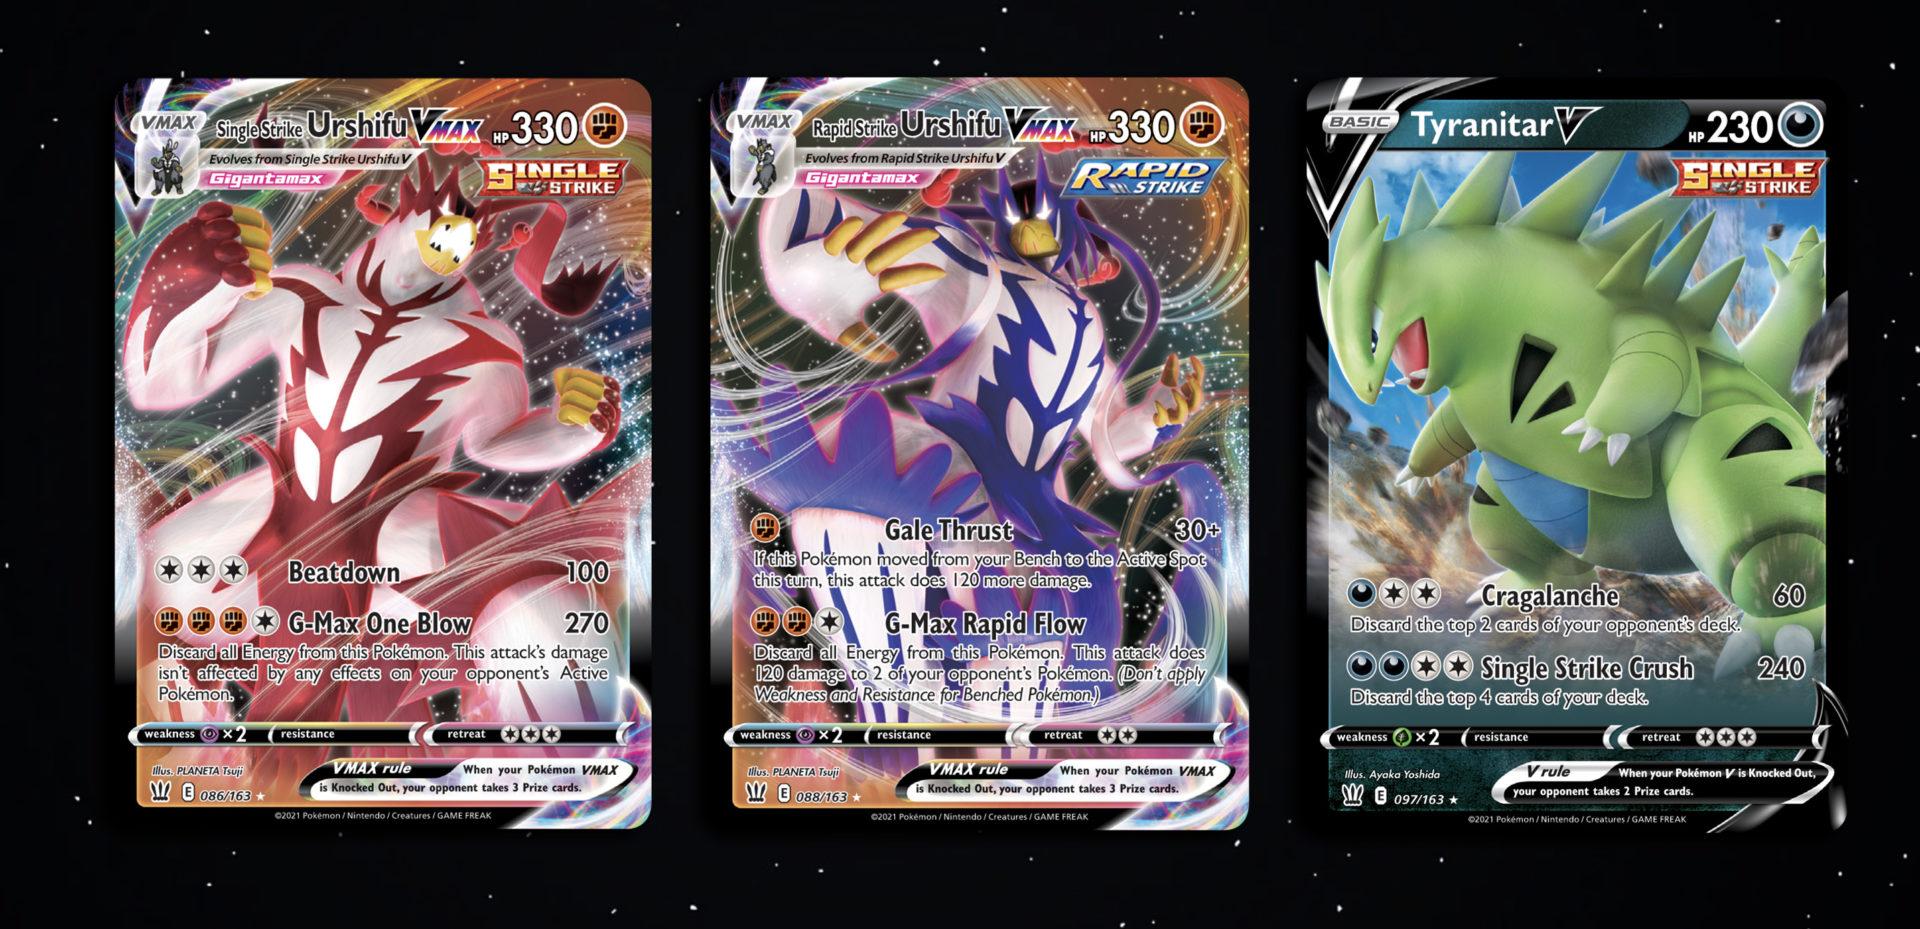 Screenshot of Pokemon cards from Battle Styles expansion.